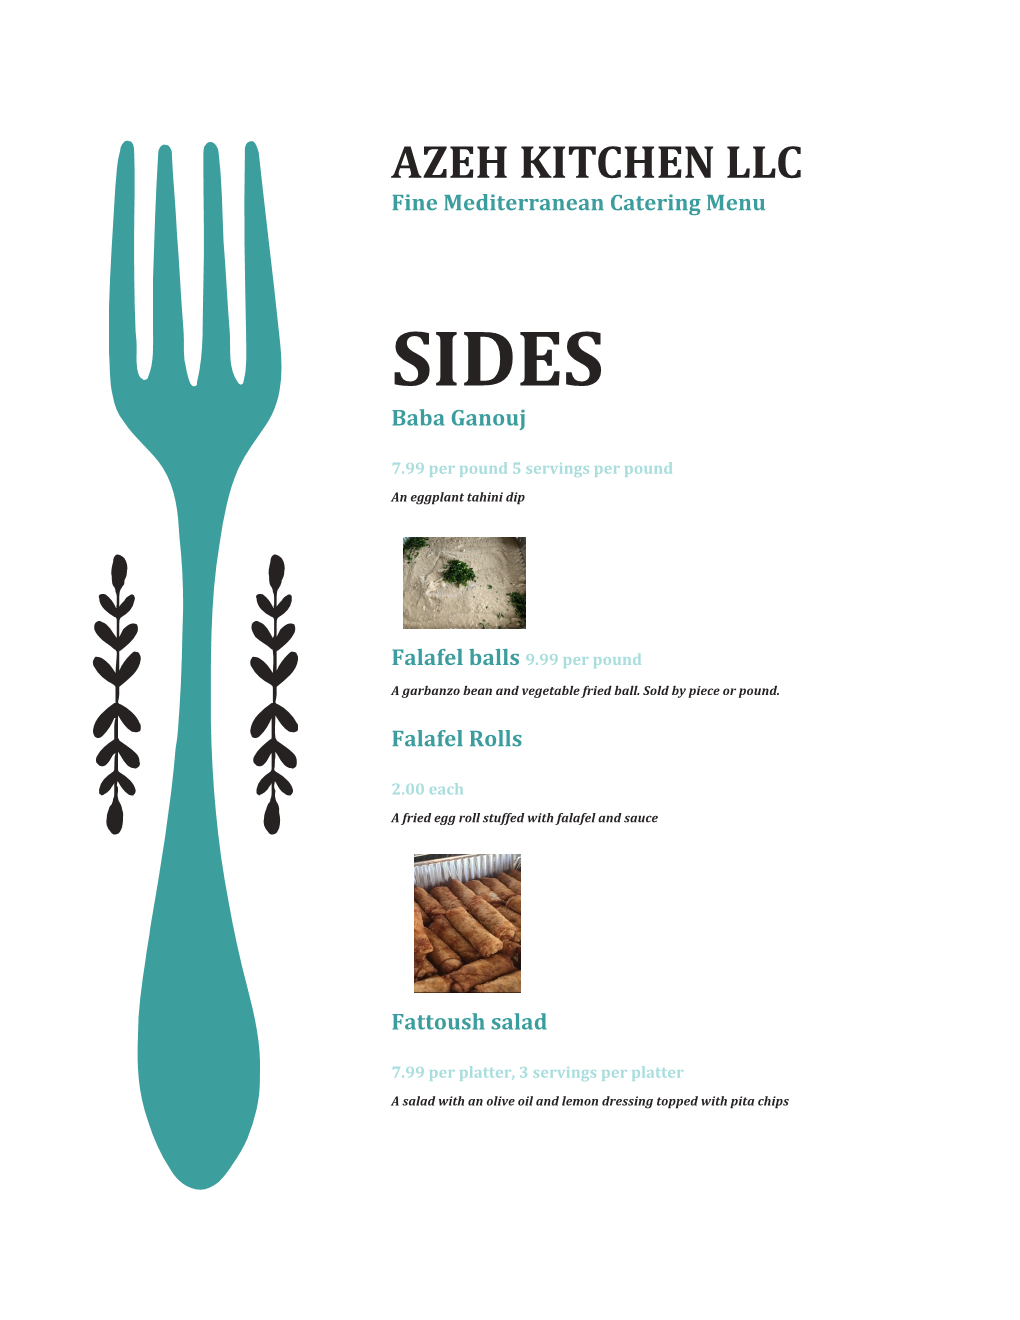 See Azeh Kitchen's Catering Menu And